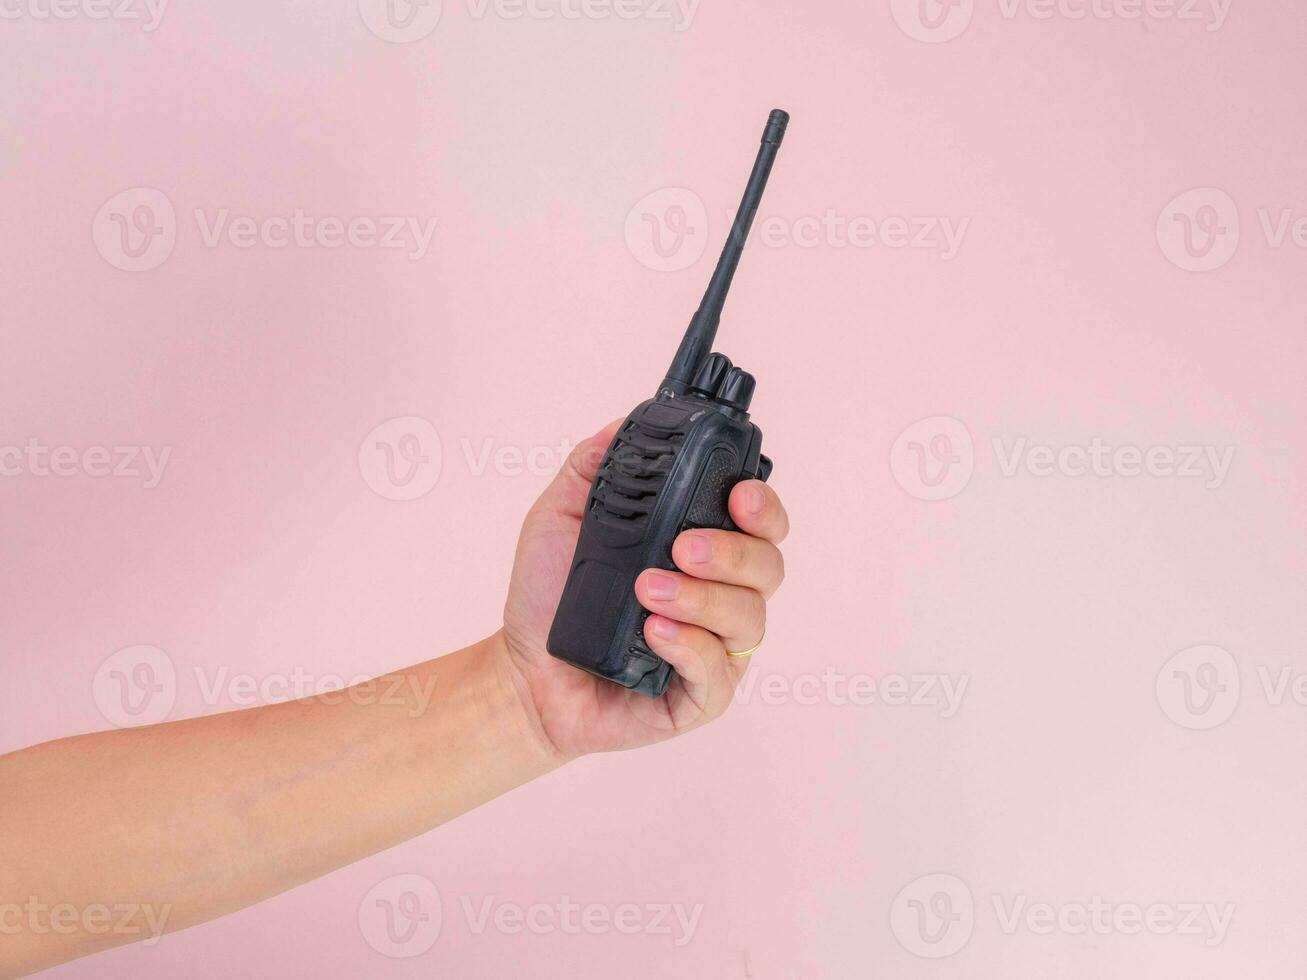 Close up hand holding portable walkie talkie isolated on pink background. Black handheld walkie talkie photo